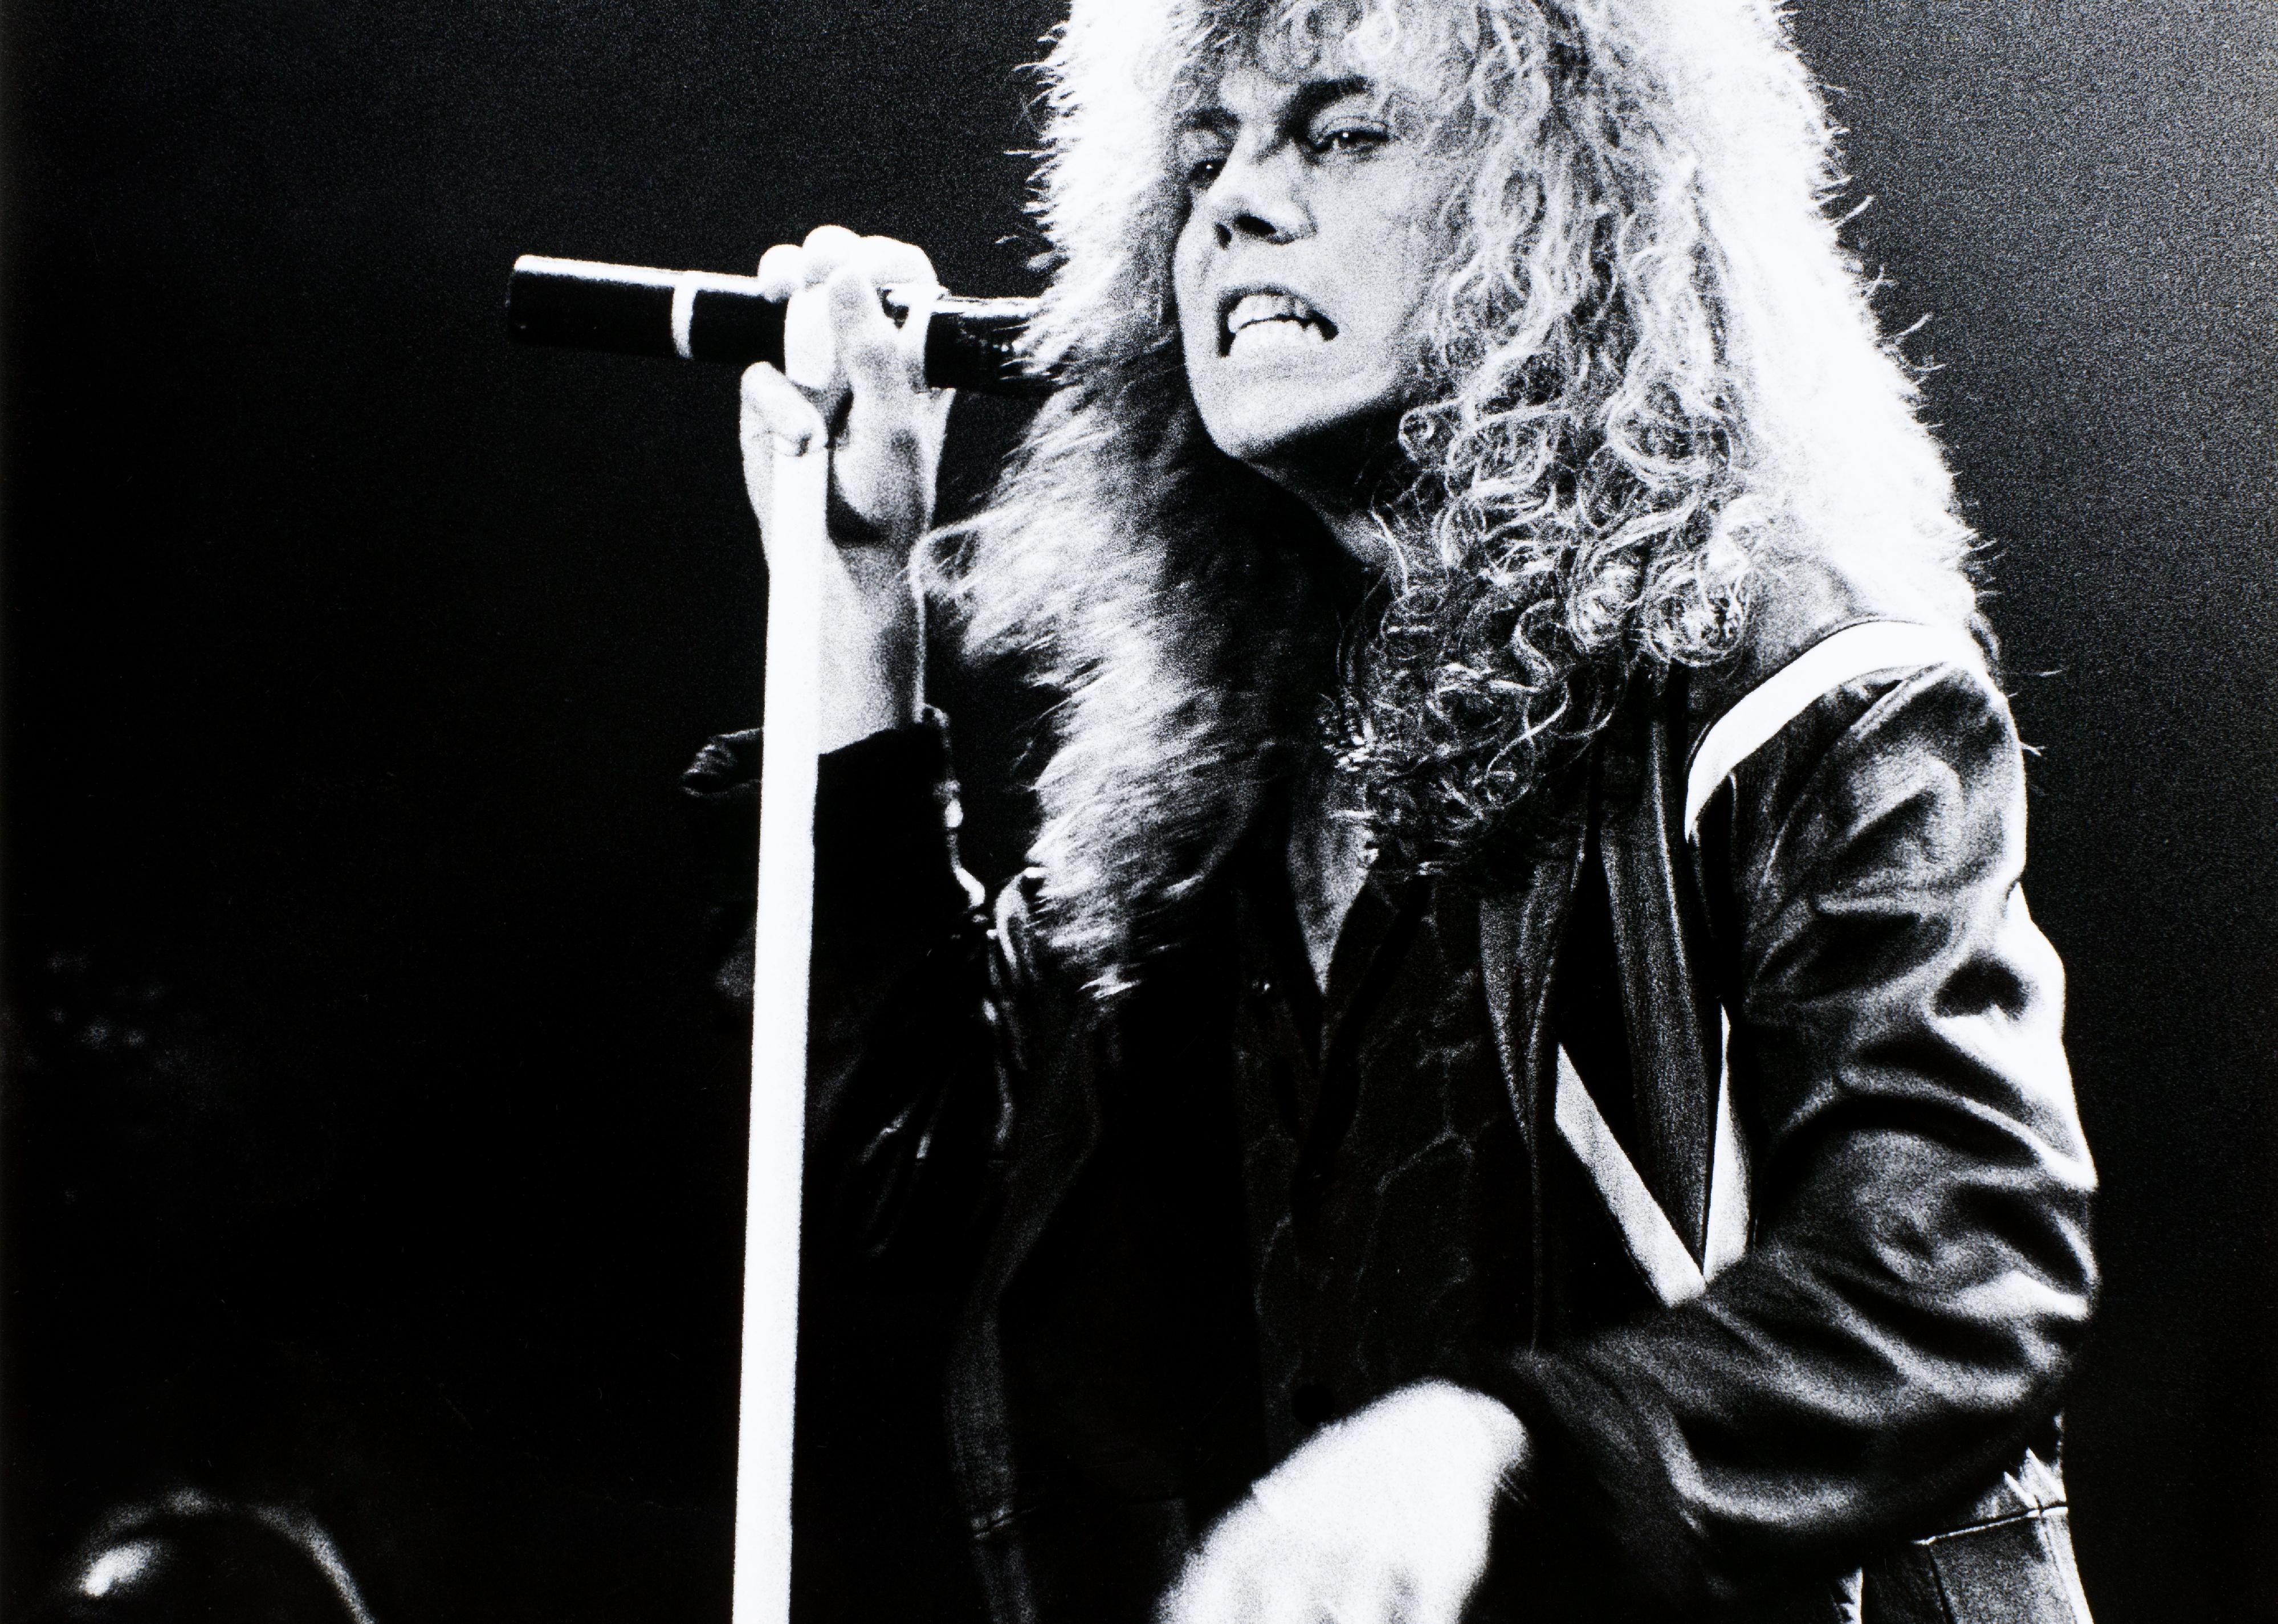 Joey Tempest of Europe performing on stage.